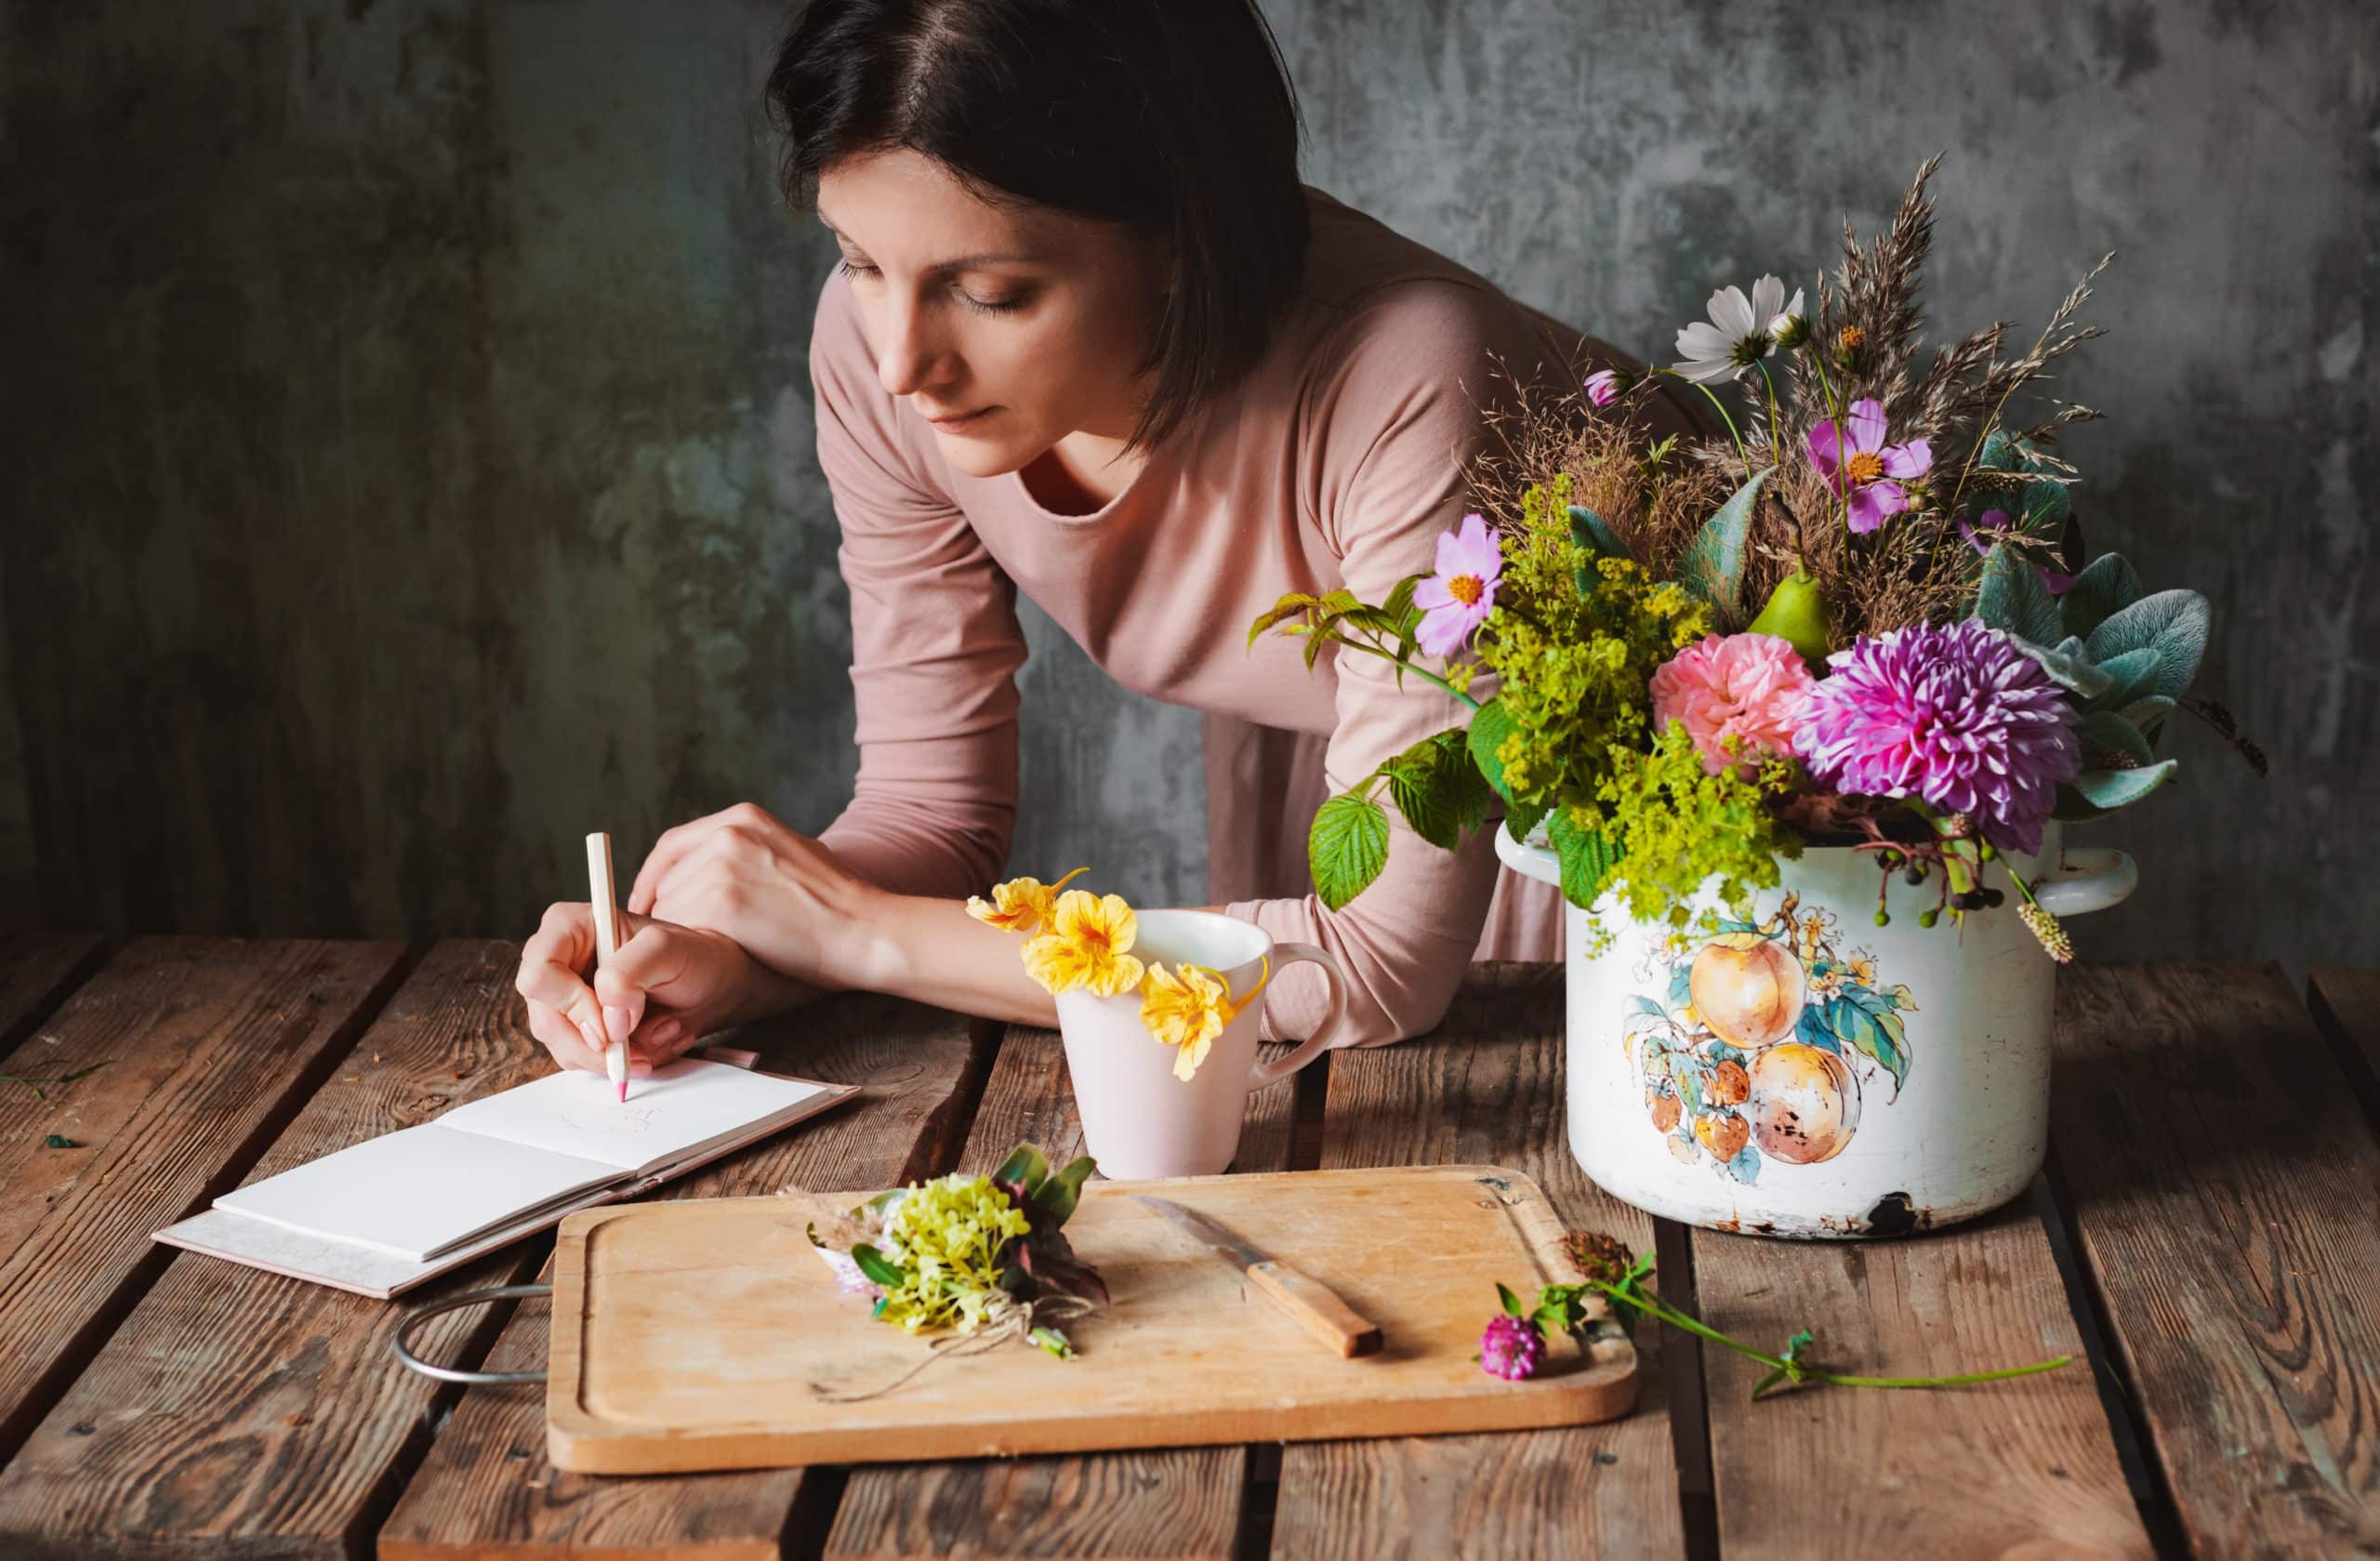 female artist draws a composition of wild flowers in a pot in a rustic style.